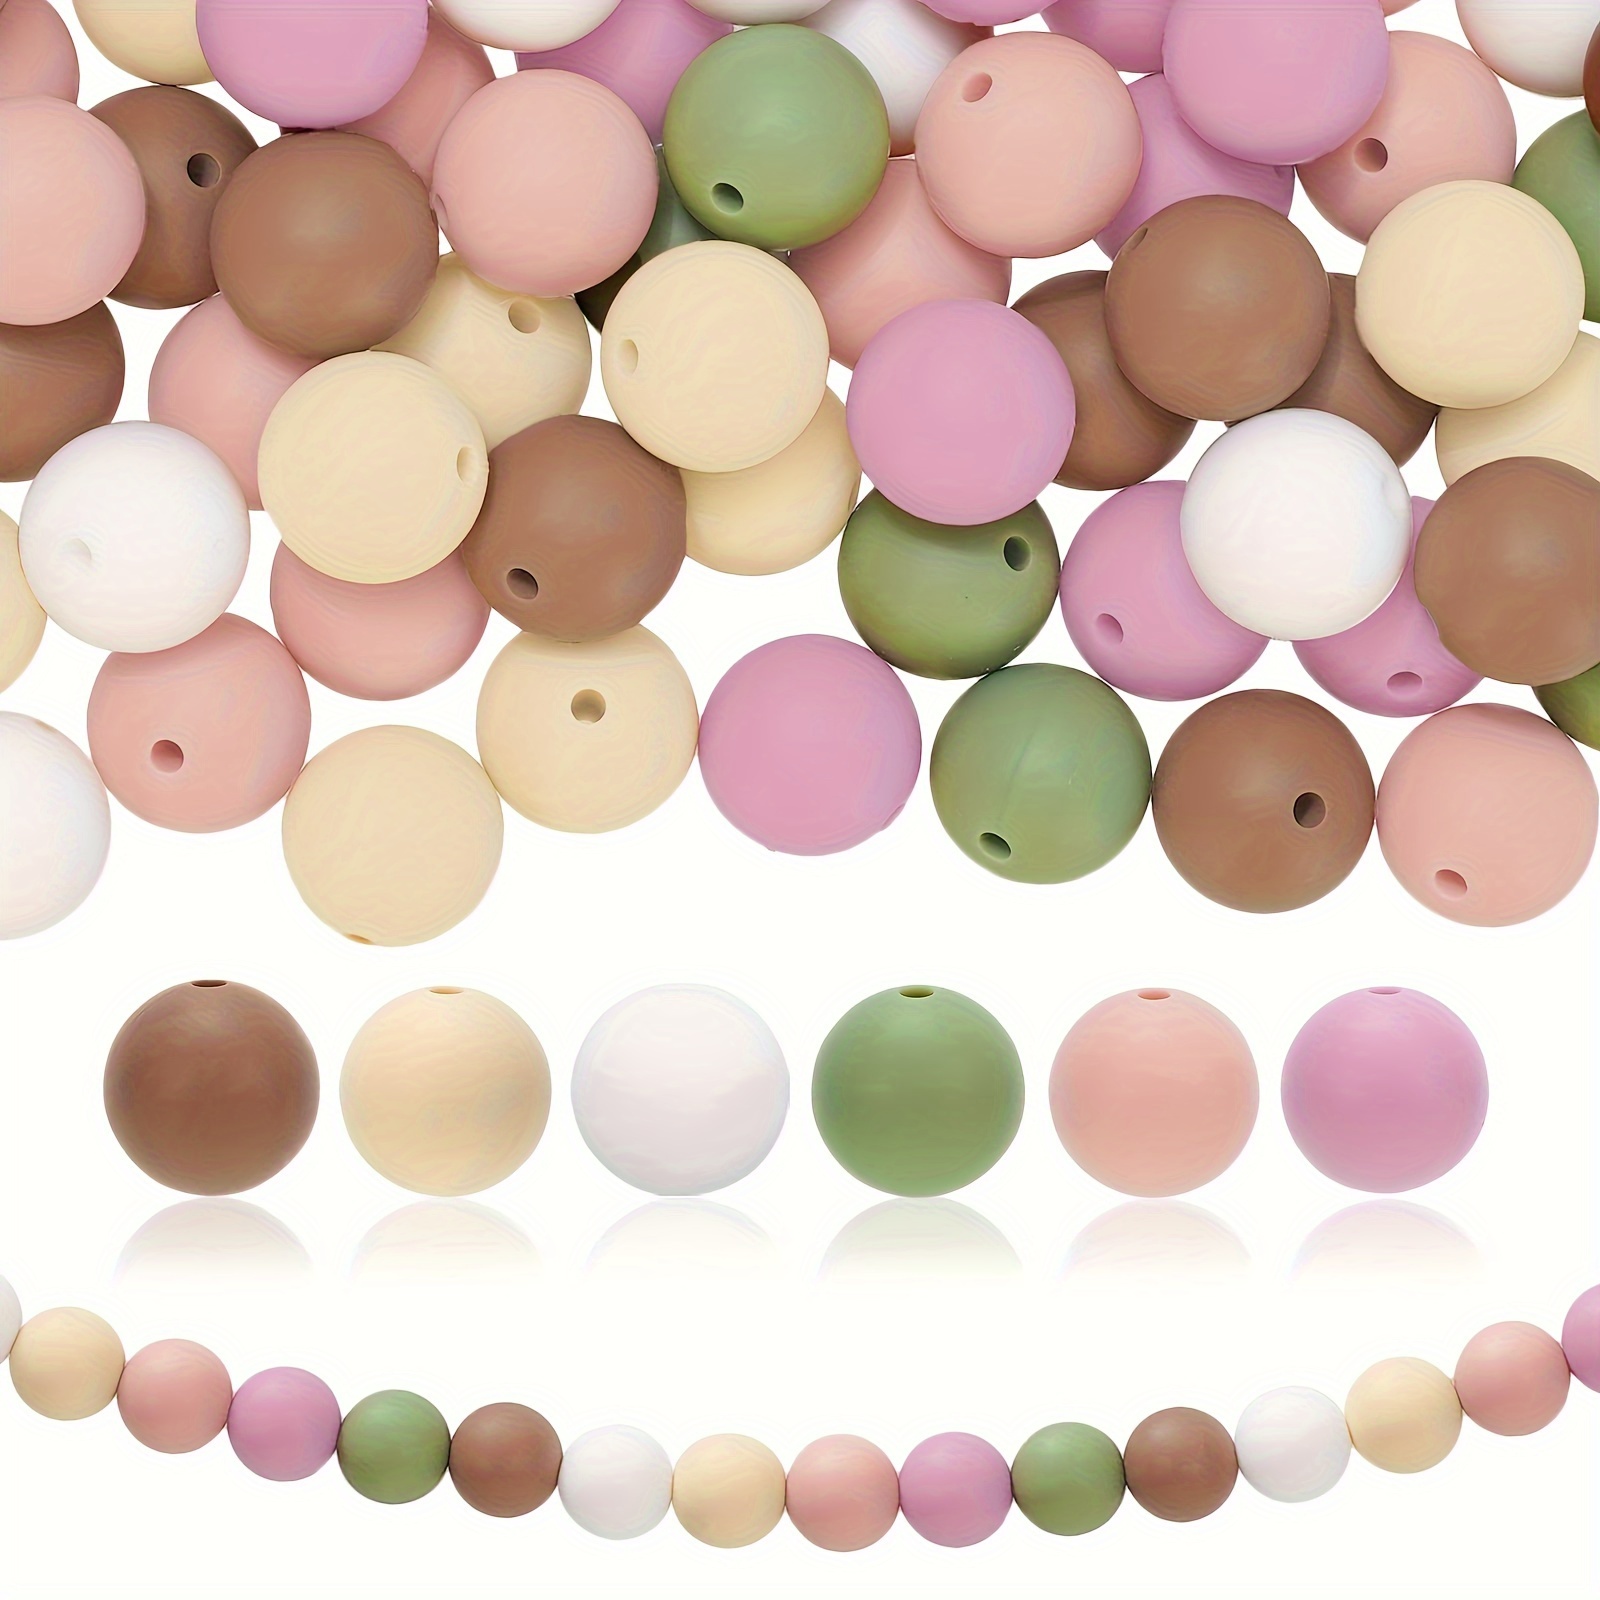 15mm Silicone Beads, 60PCS Silicone Beads Bulk for Pens Keychain